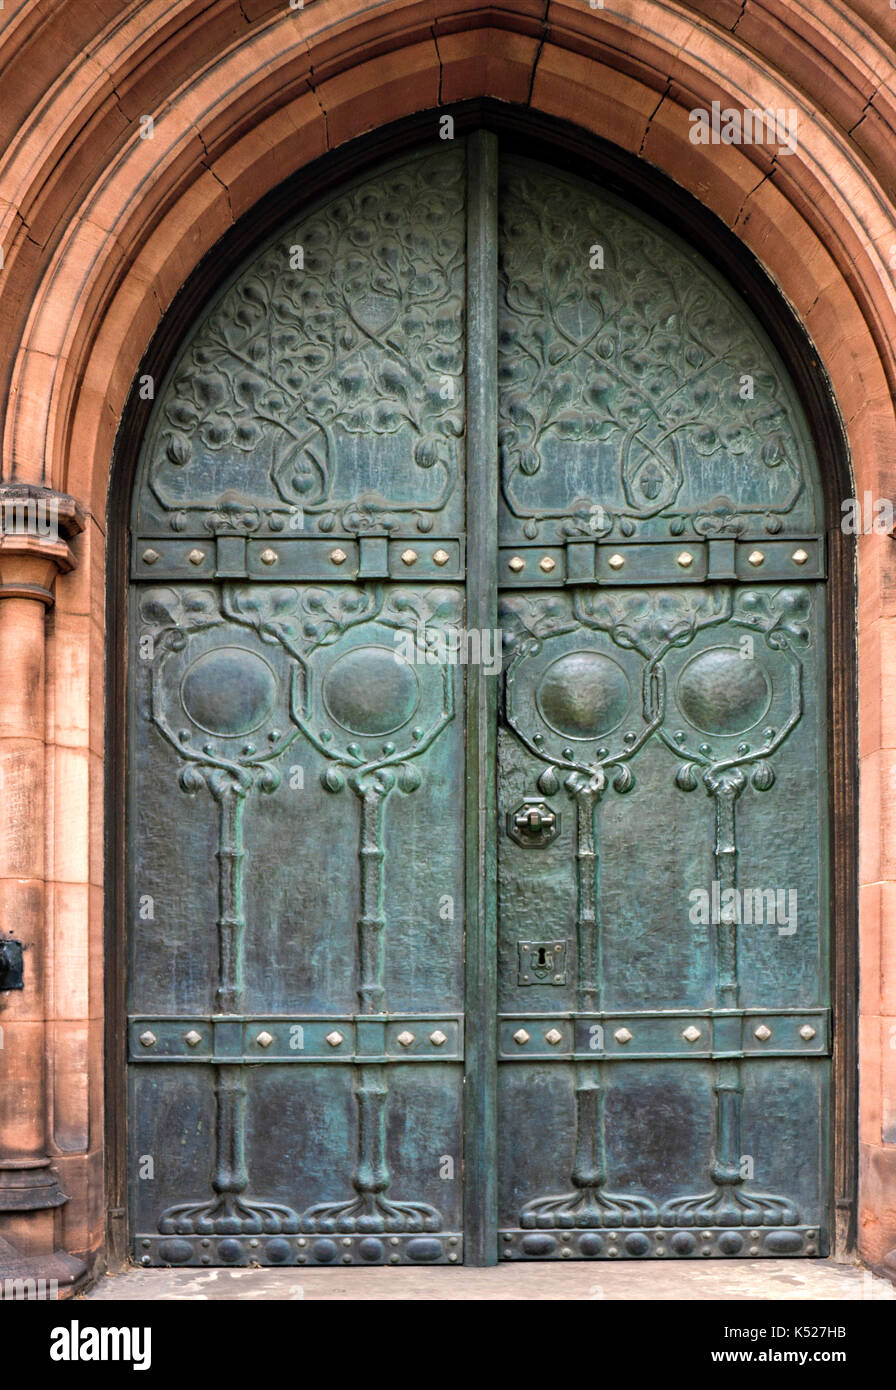 Decorative Art Nouveau door of the Unitarian Church,Ullet Road, Liverpool, by Thomas Worthington 1896-9 featuring stained glass by Robert Morris. Stock Photo